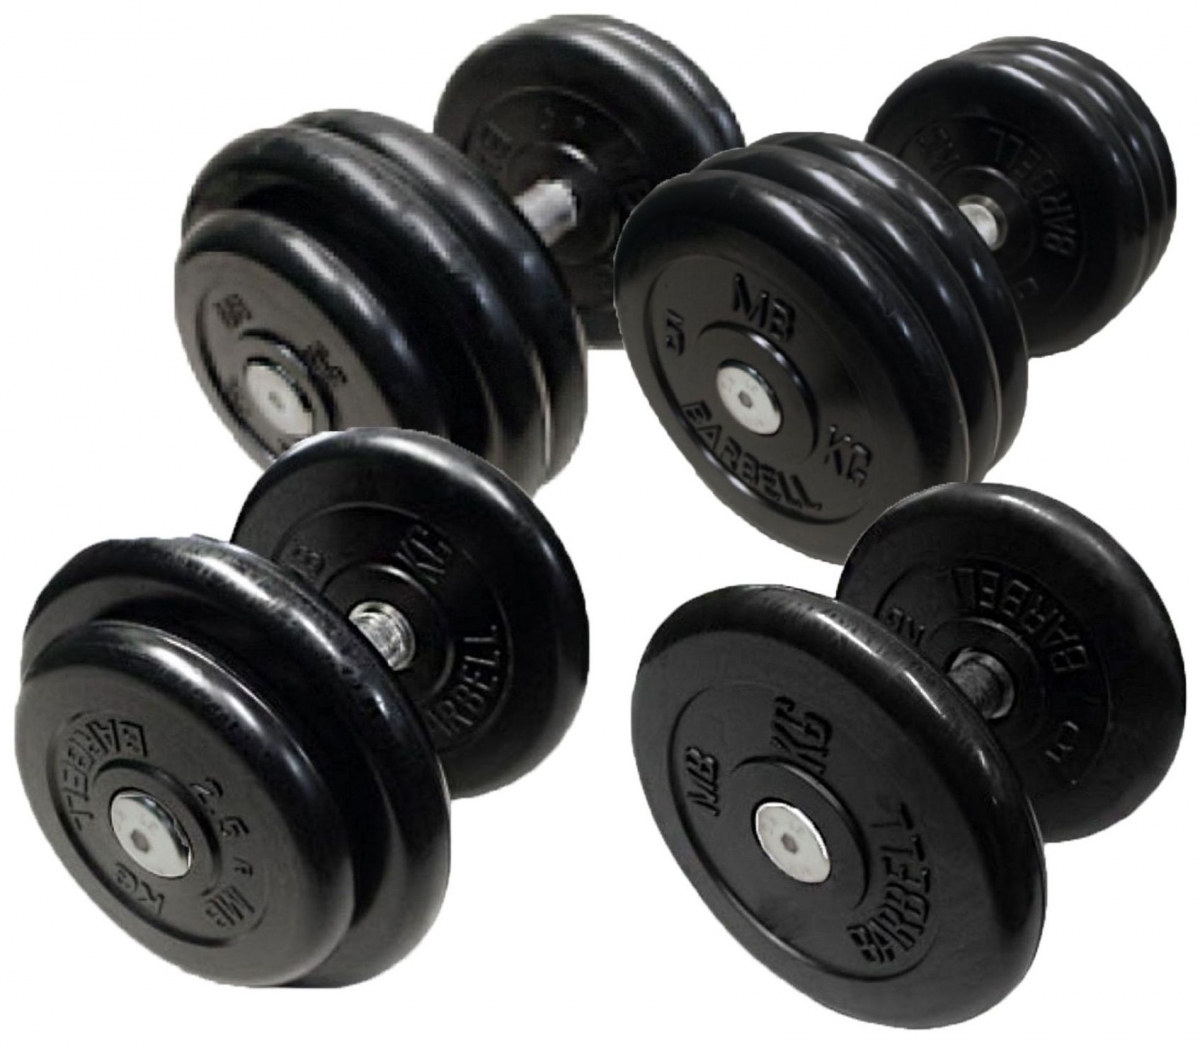    MB Barbell 3.5-38.5 